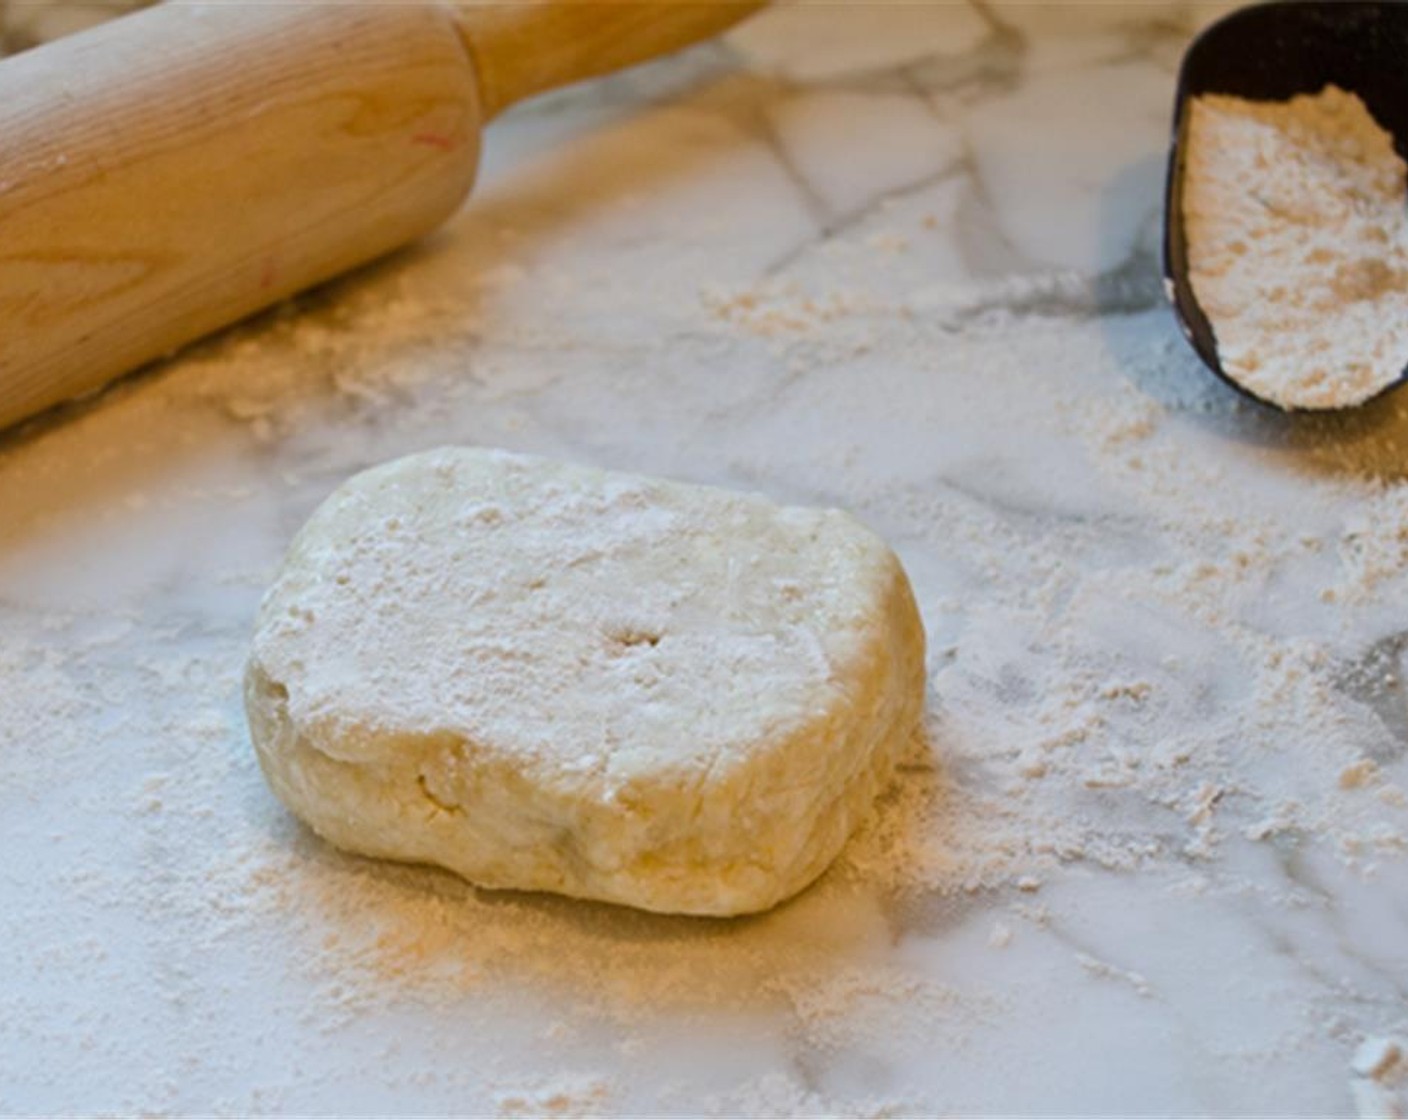 step 7 Remove one disc of dough from the refrigerator, unwrap it and place it on a lightly floured work surface. Dust the top of the dough lightly with flour, then use a rolling pin to roll it into a 10-11 inch circle, or just under an 1/8 inch thick.